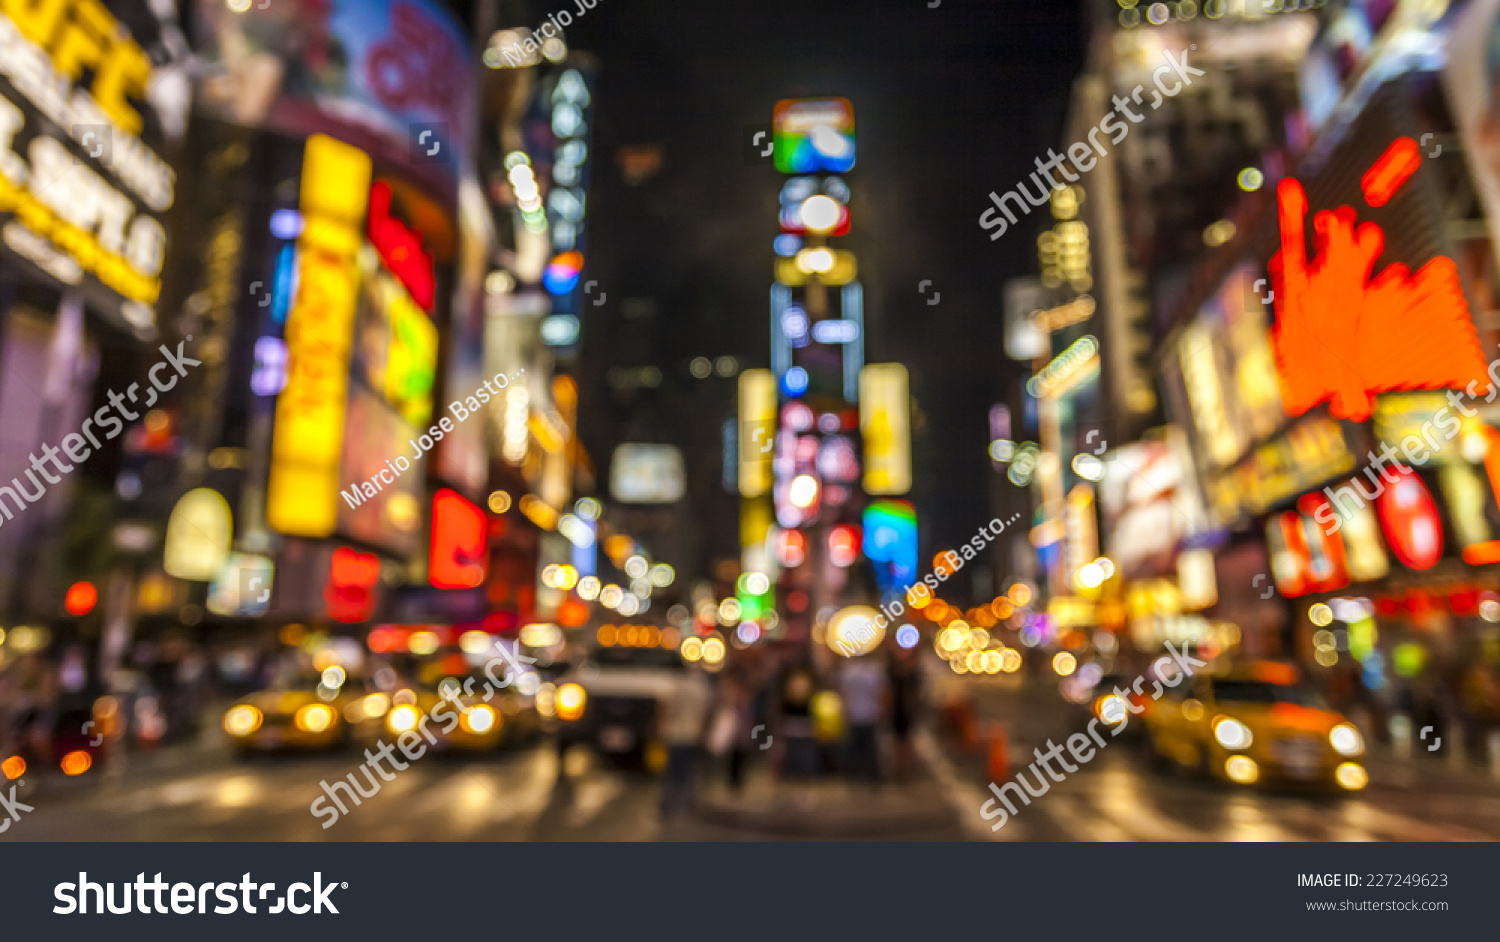 Abstract and conceptual view of New York city in the USA showcasing The lights of Times Square at night. #227249623